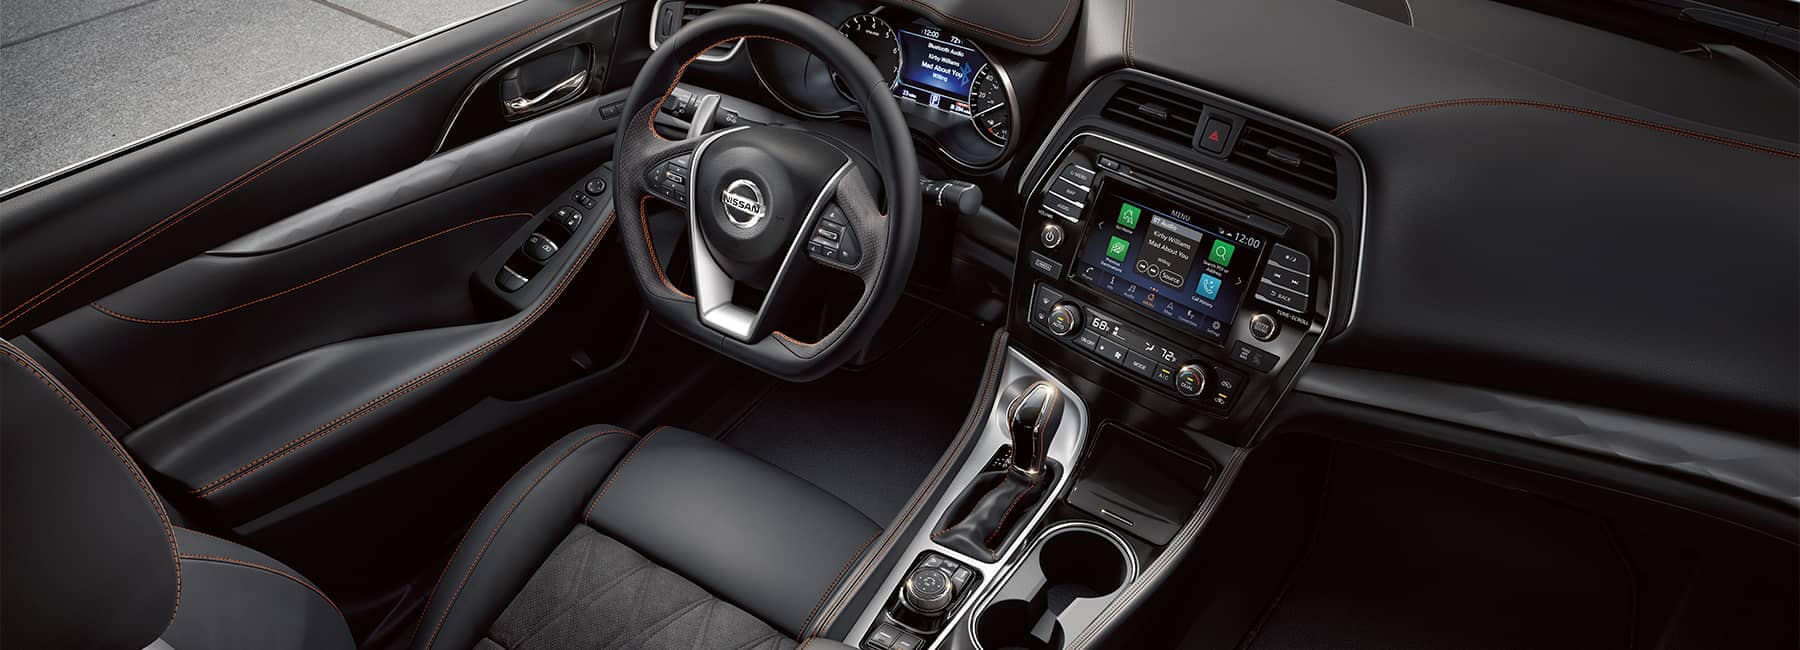 The black leather drivers seat and dashboard of a 2021 Nissan Maxima